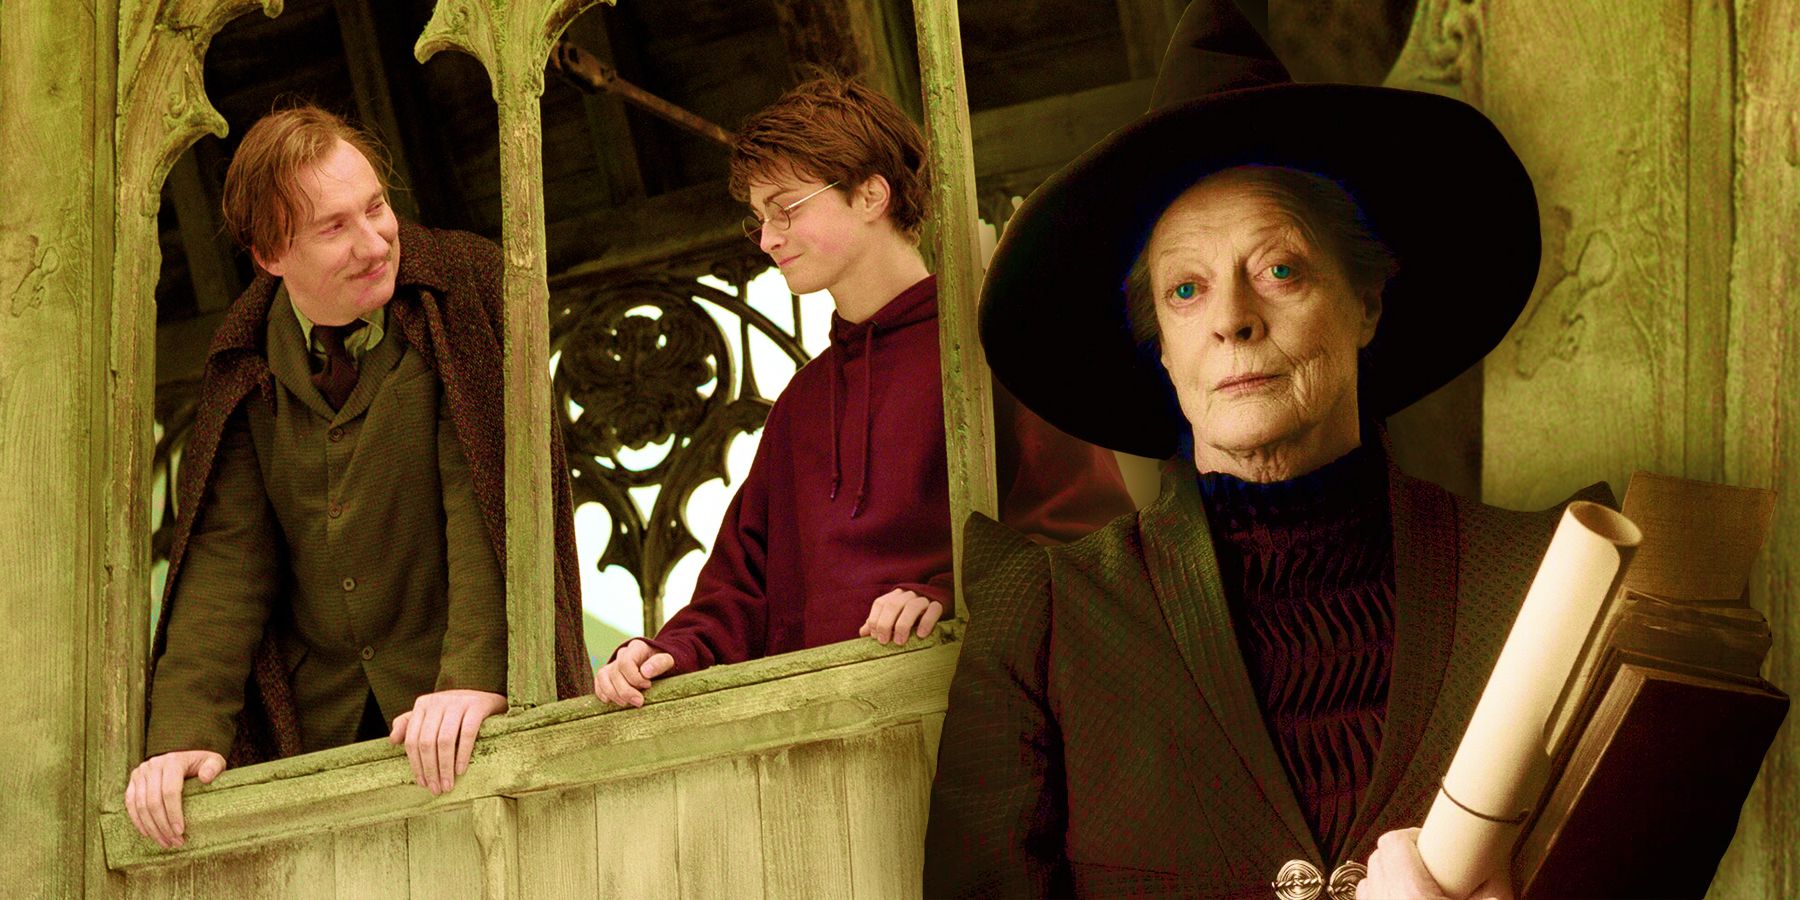 Who is the most loved teacher at Hogwarts?